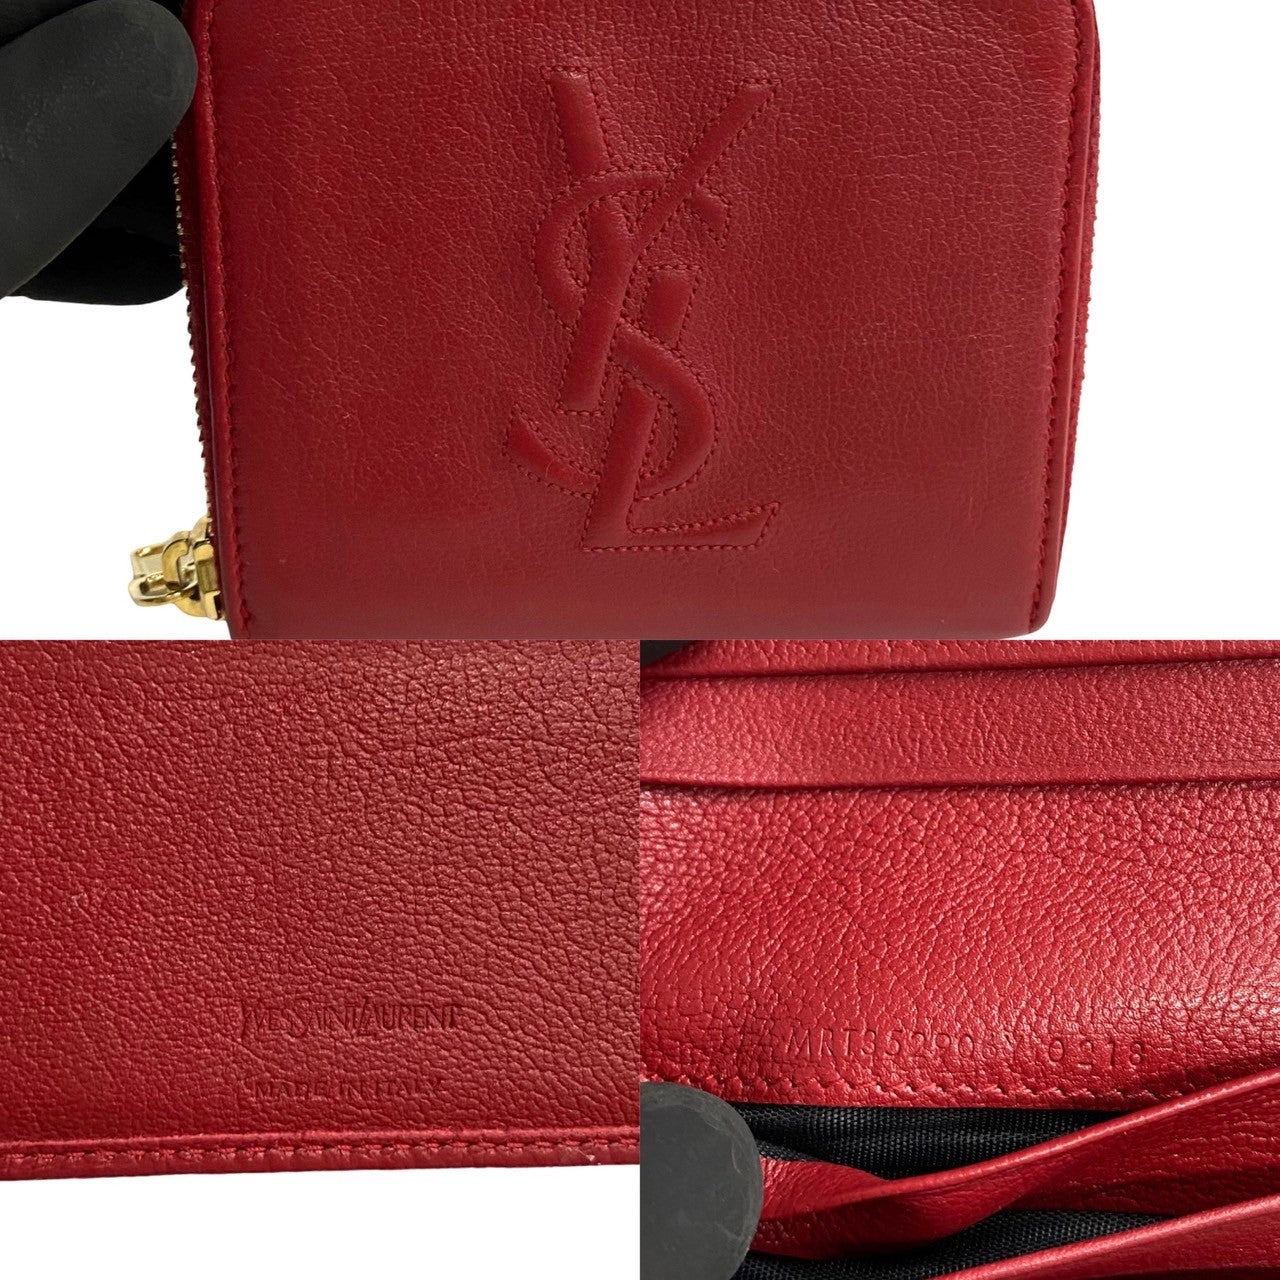 Yves Saint Laurent Leather Zip Bifold Compact Wallet Leather Short Wallet in Good condition